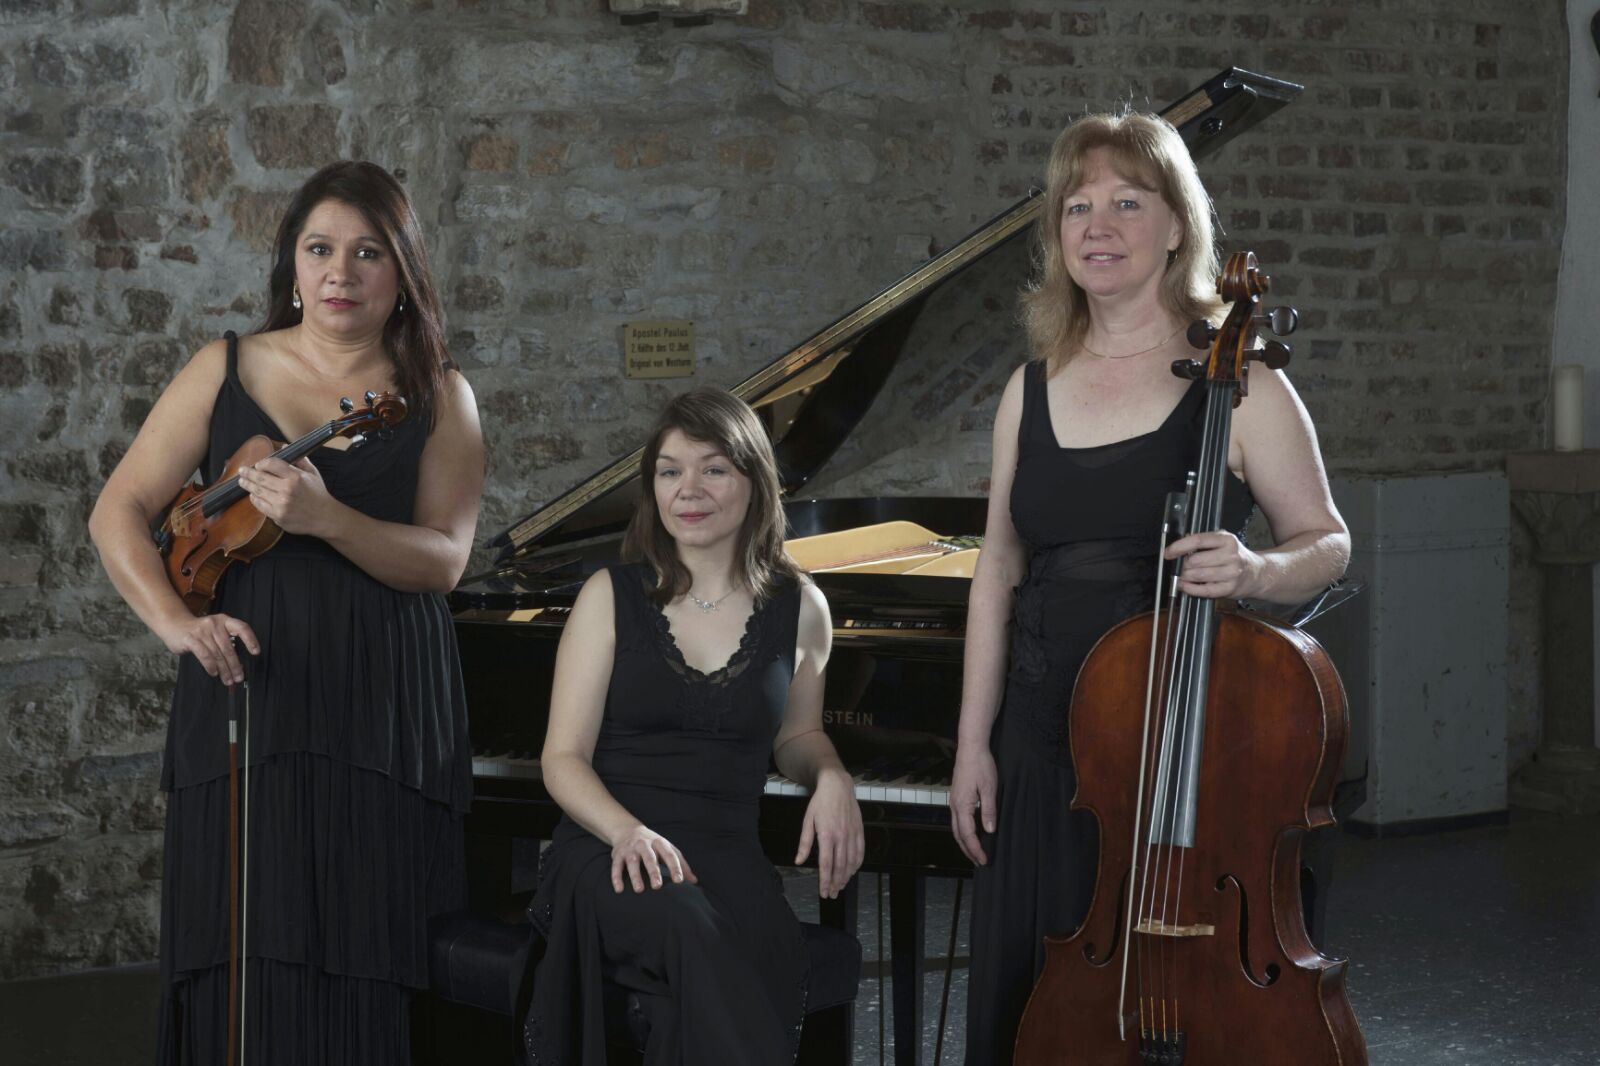 Tria (Marisa Aramayo, Marie Charline Foccroulle, Polly Lohrer)